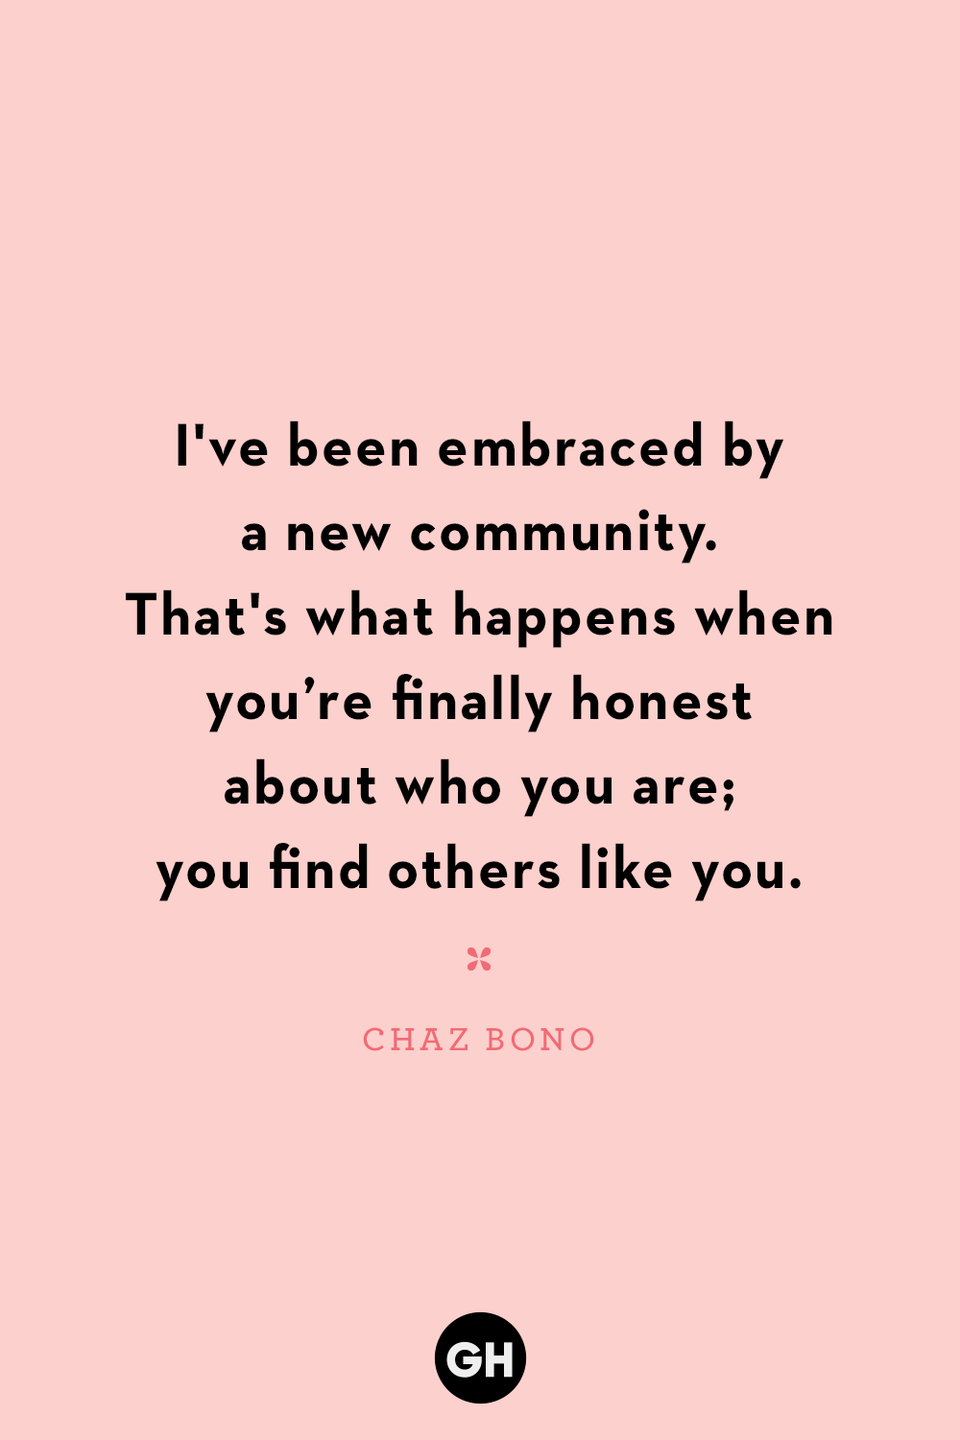 <p>I've been embraced by a new community. That's what happens when you’re finally honest about who you are; you find others like you. </p>